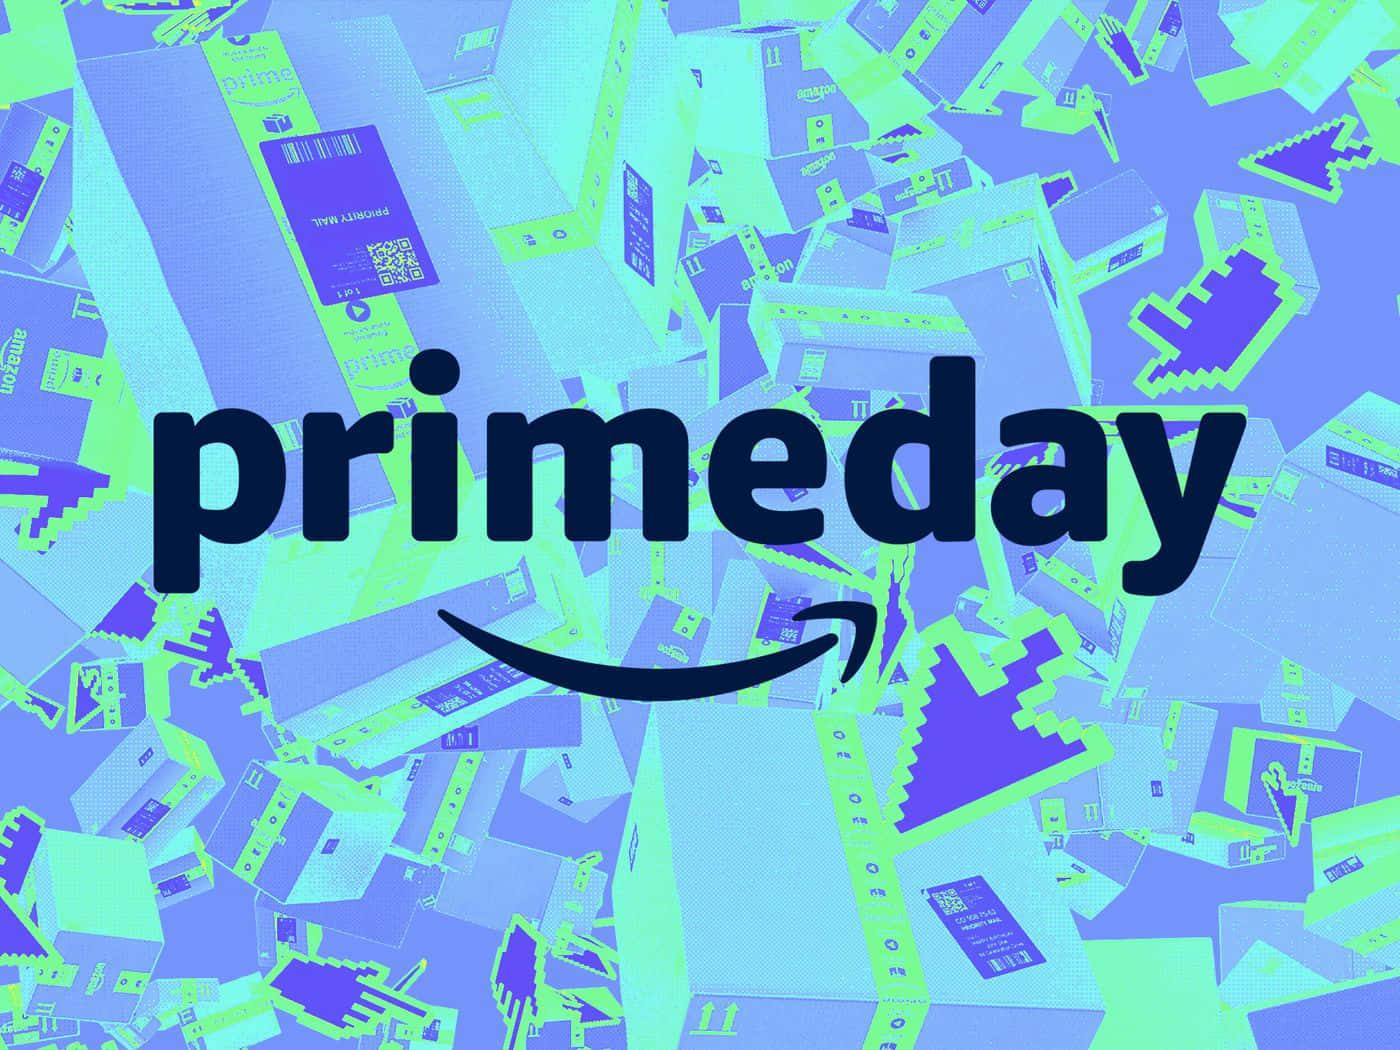 Prime Day Event Promotion Wallpaper